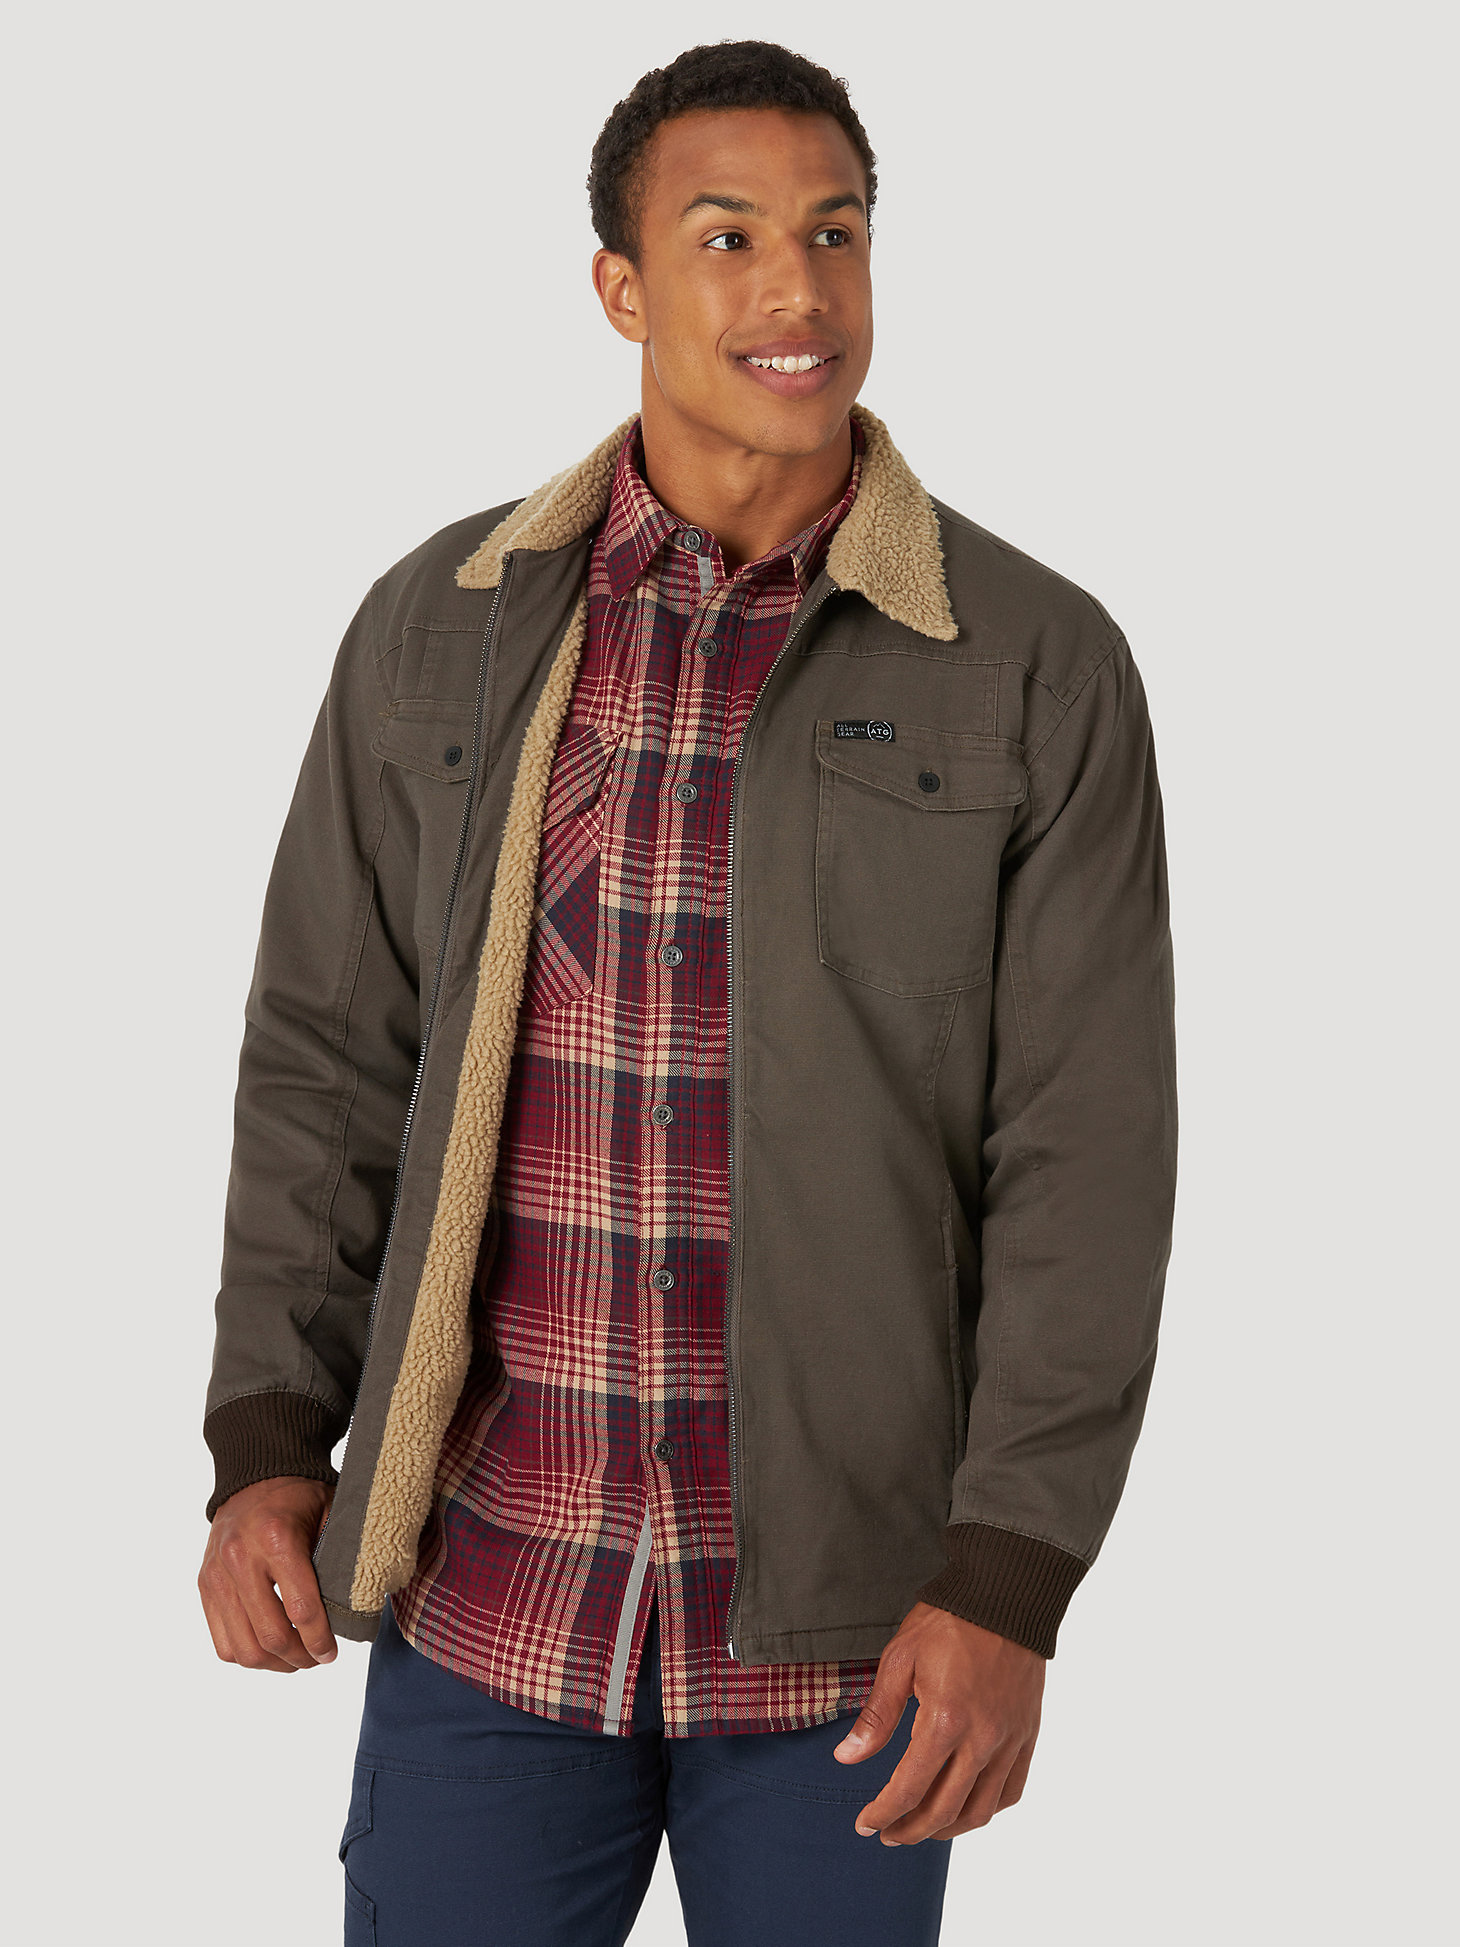 ATG by Wrangler™ Men's Sherpa Lined Canvas Jacket in Major Brown main view